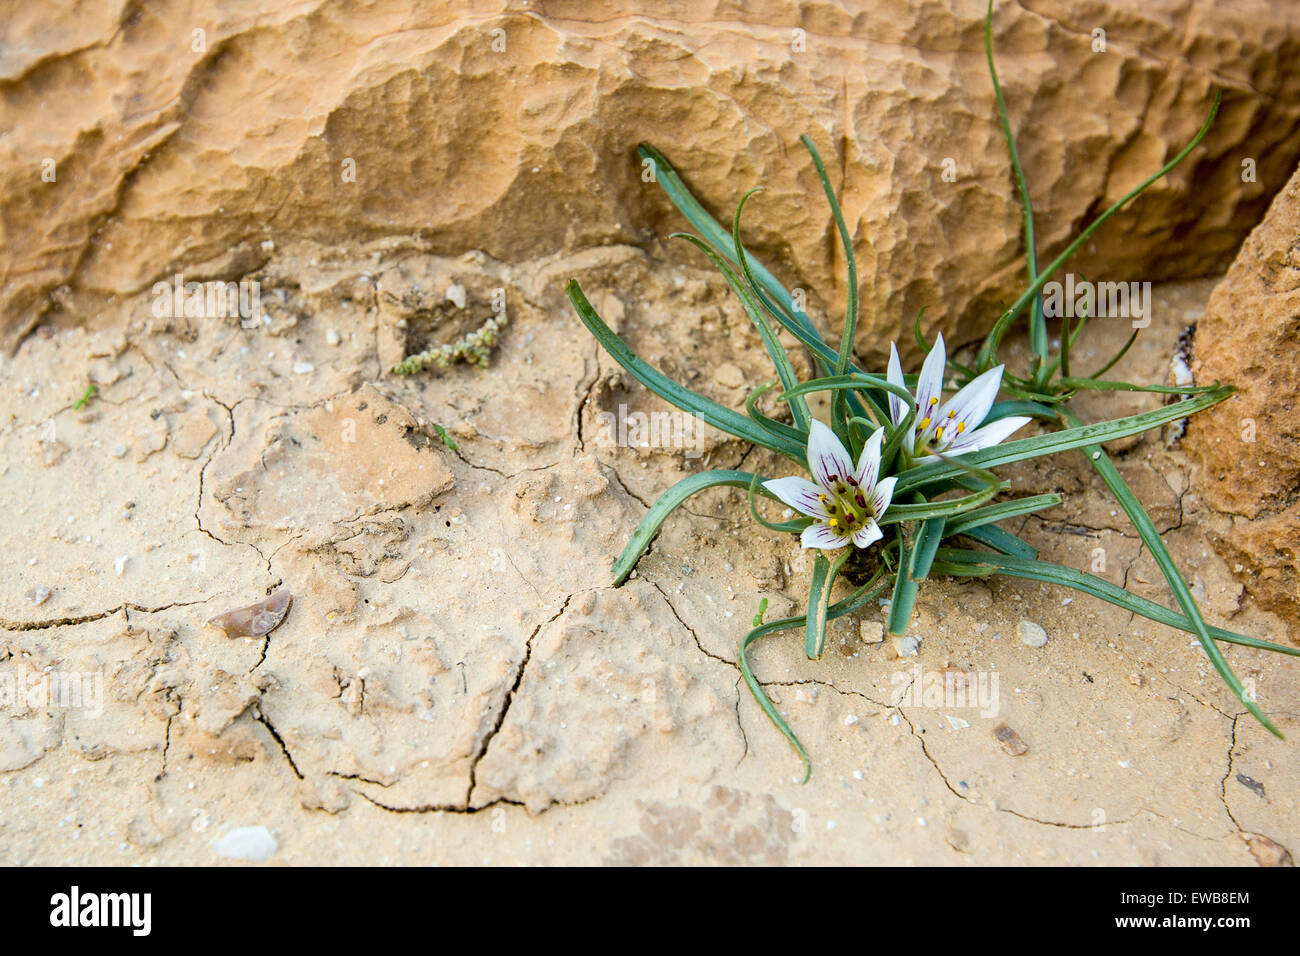 Desert Bulb (Androcymbium palaestinum) Photographed in Israel in January. A Delicate showy perennial, with a small underground c Stock Photo